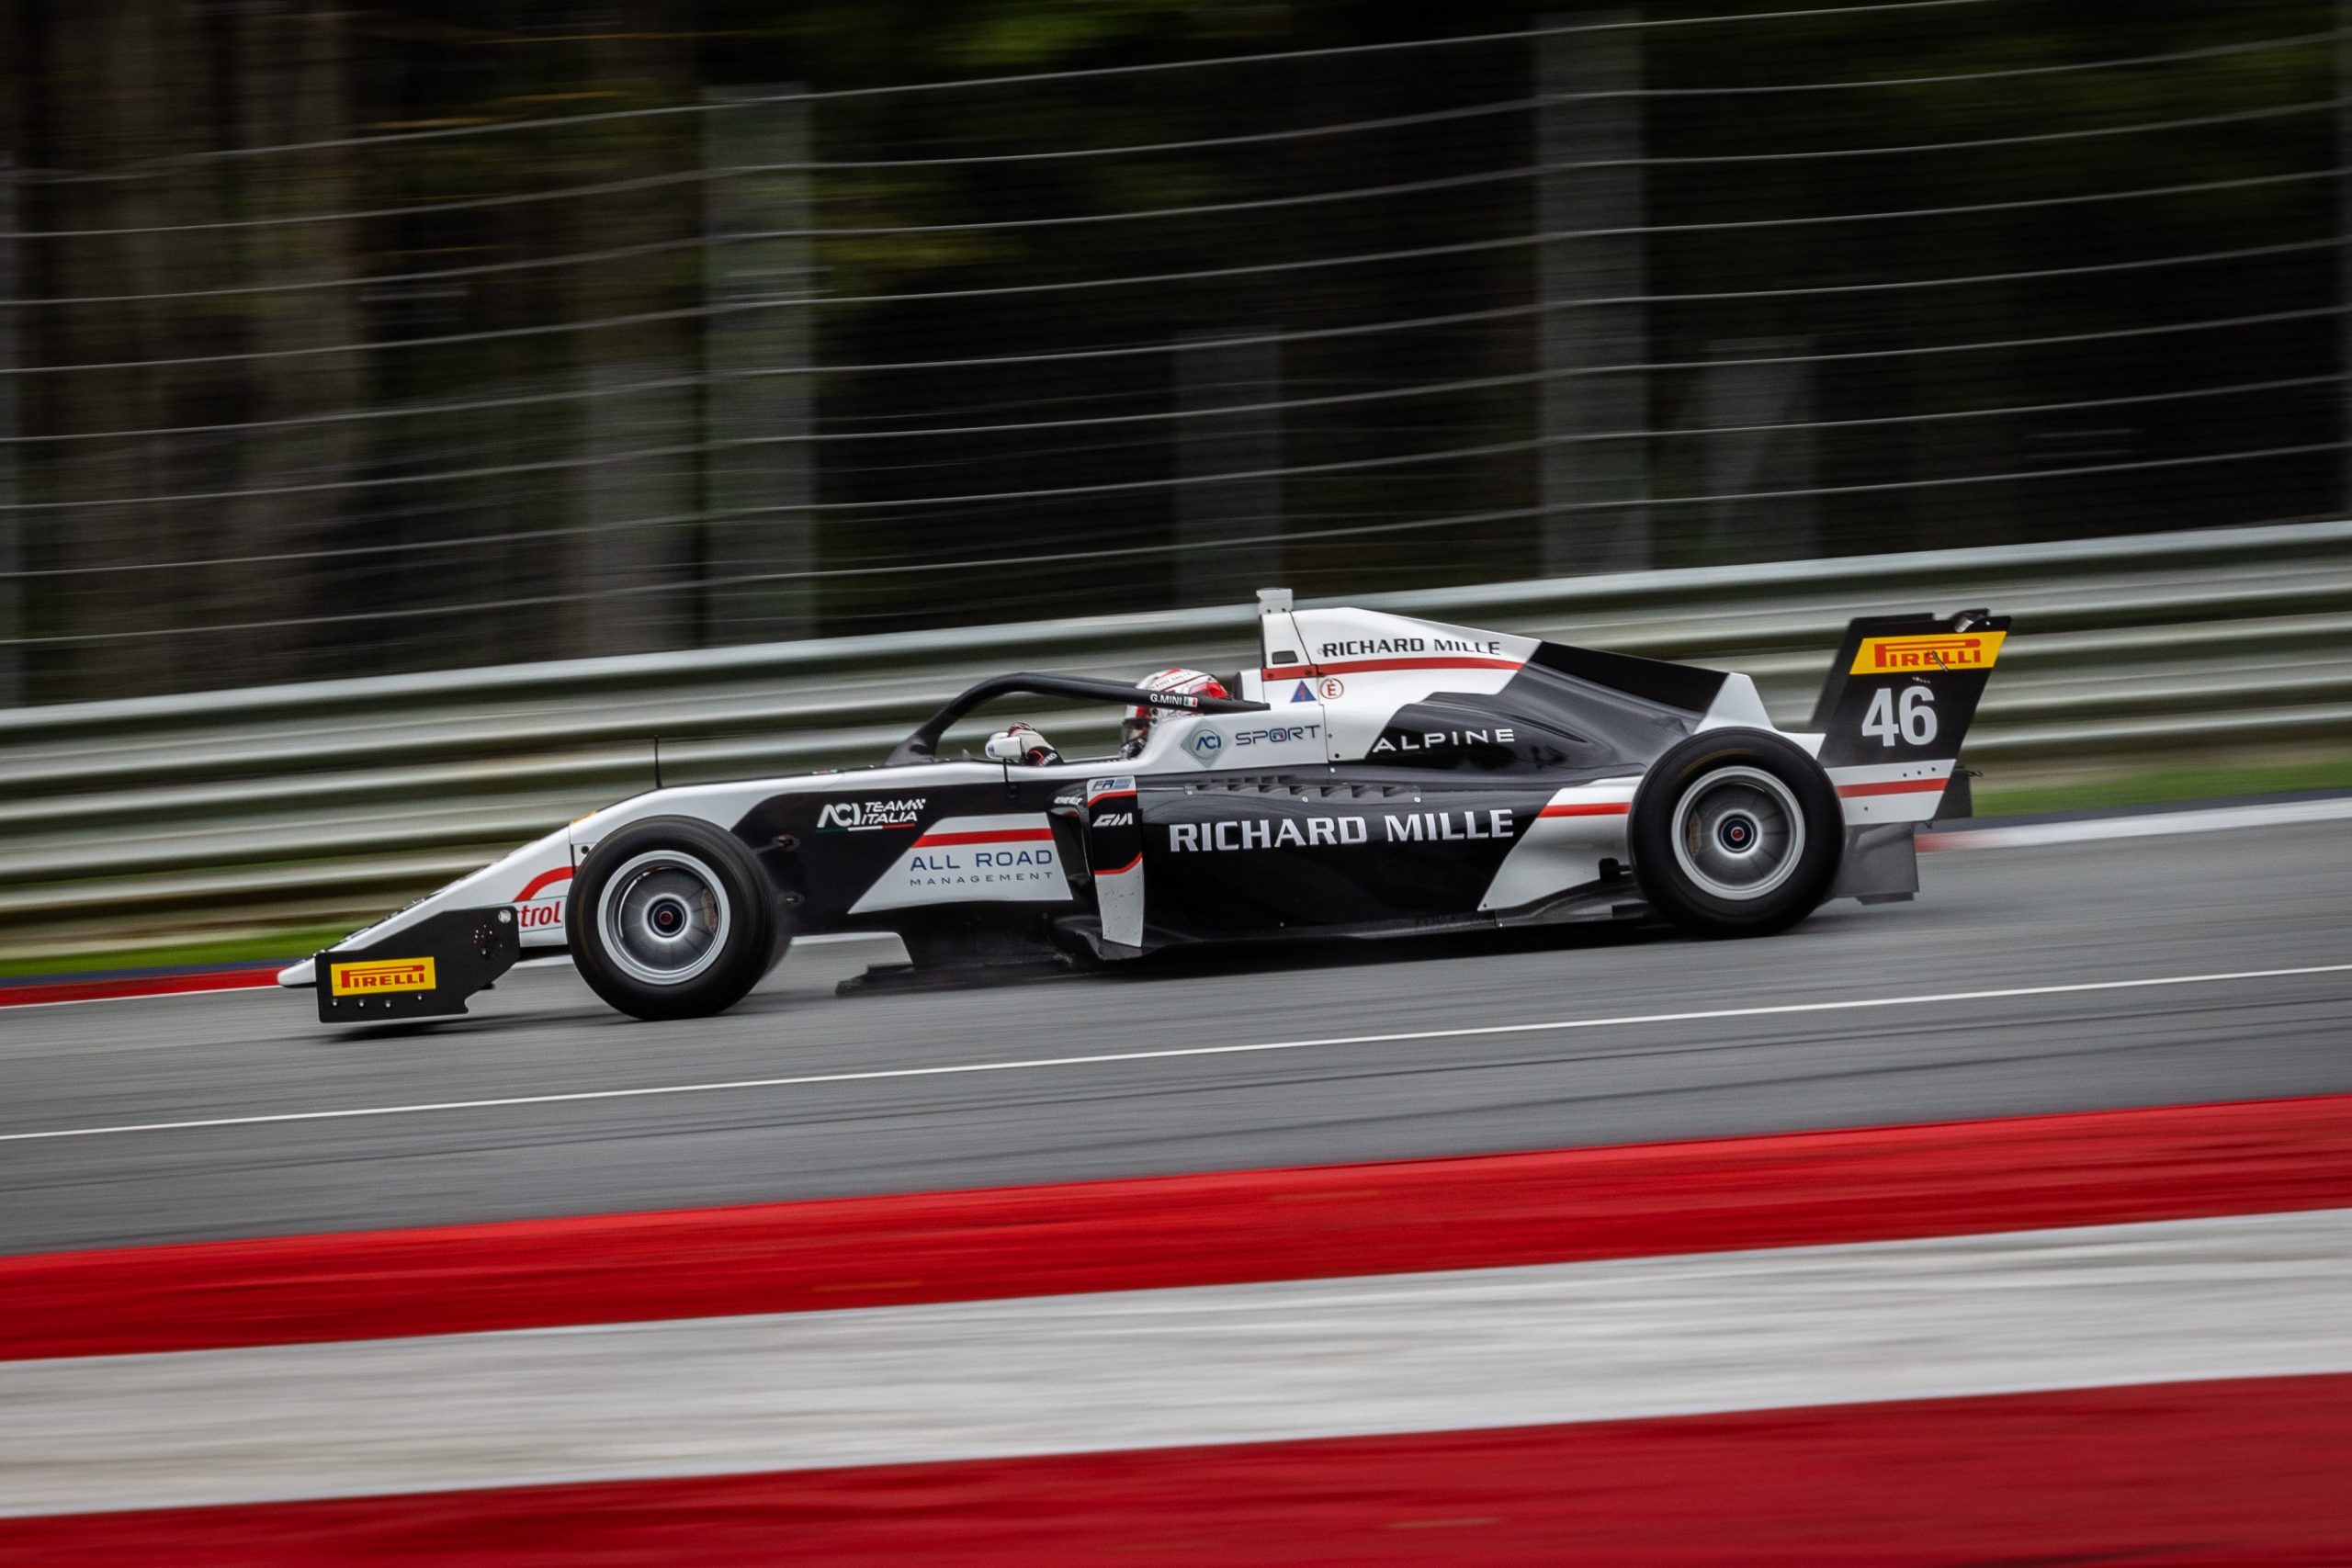 Point finishes at Red Bull Ring...